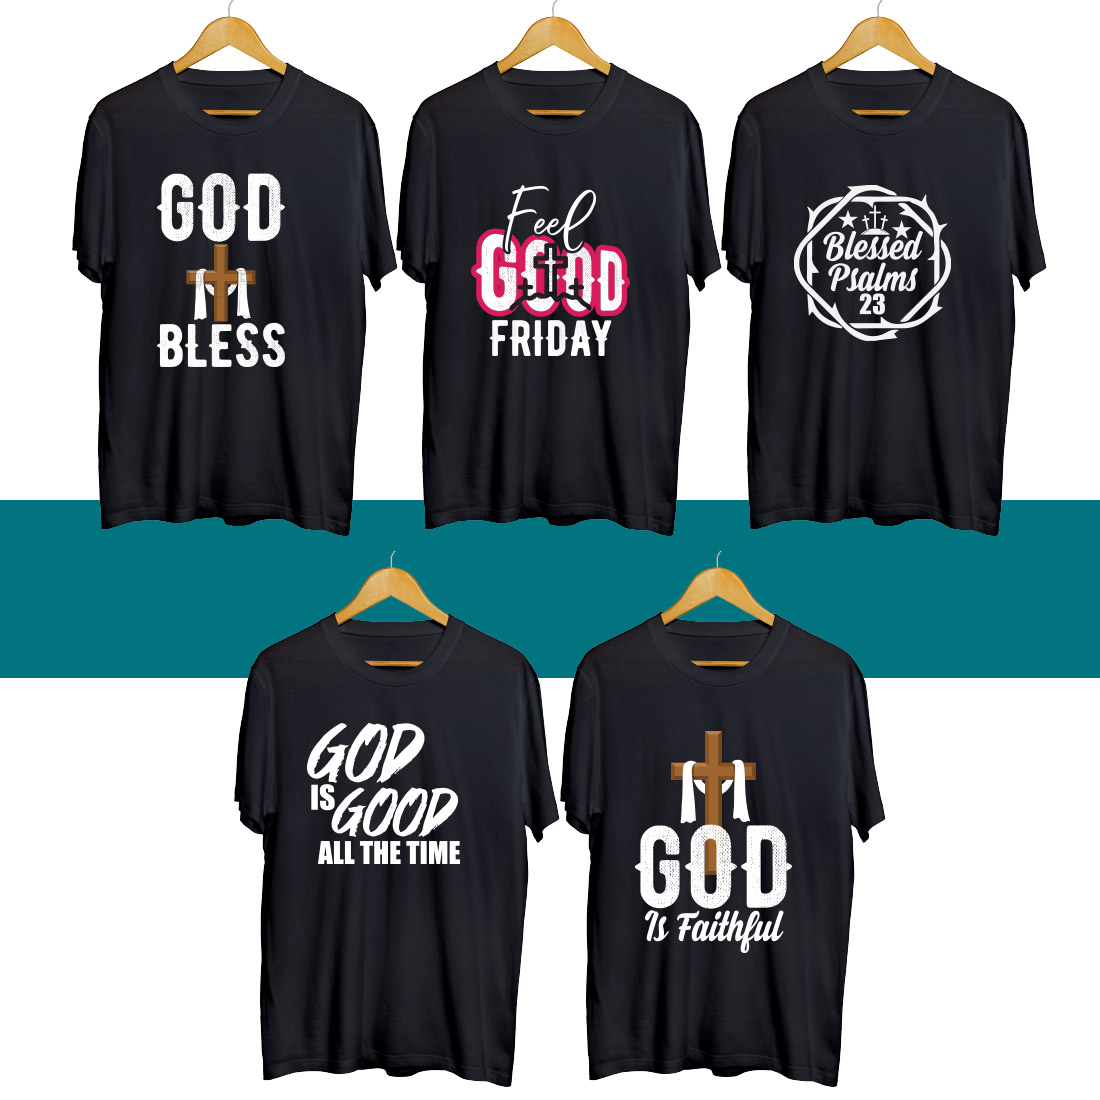 Four t - shirts with the words god is good and god is good on them.